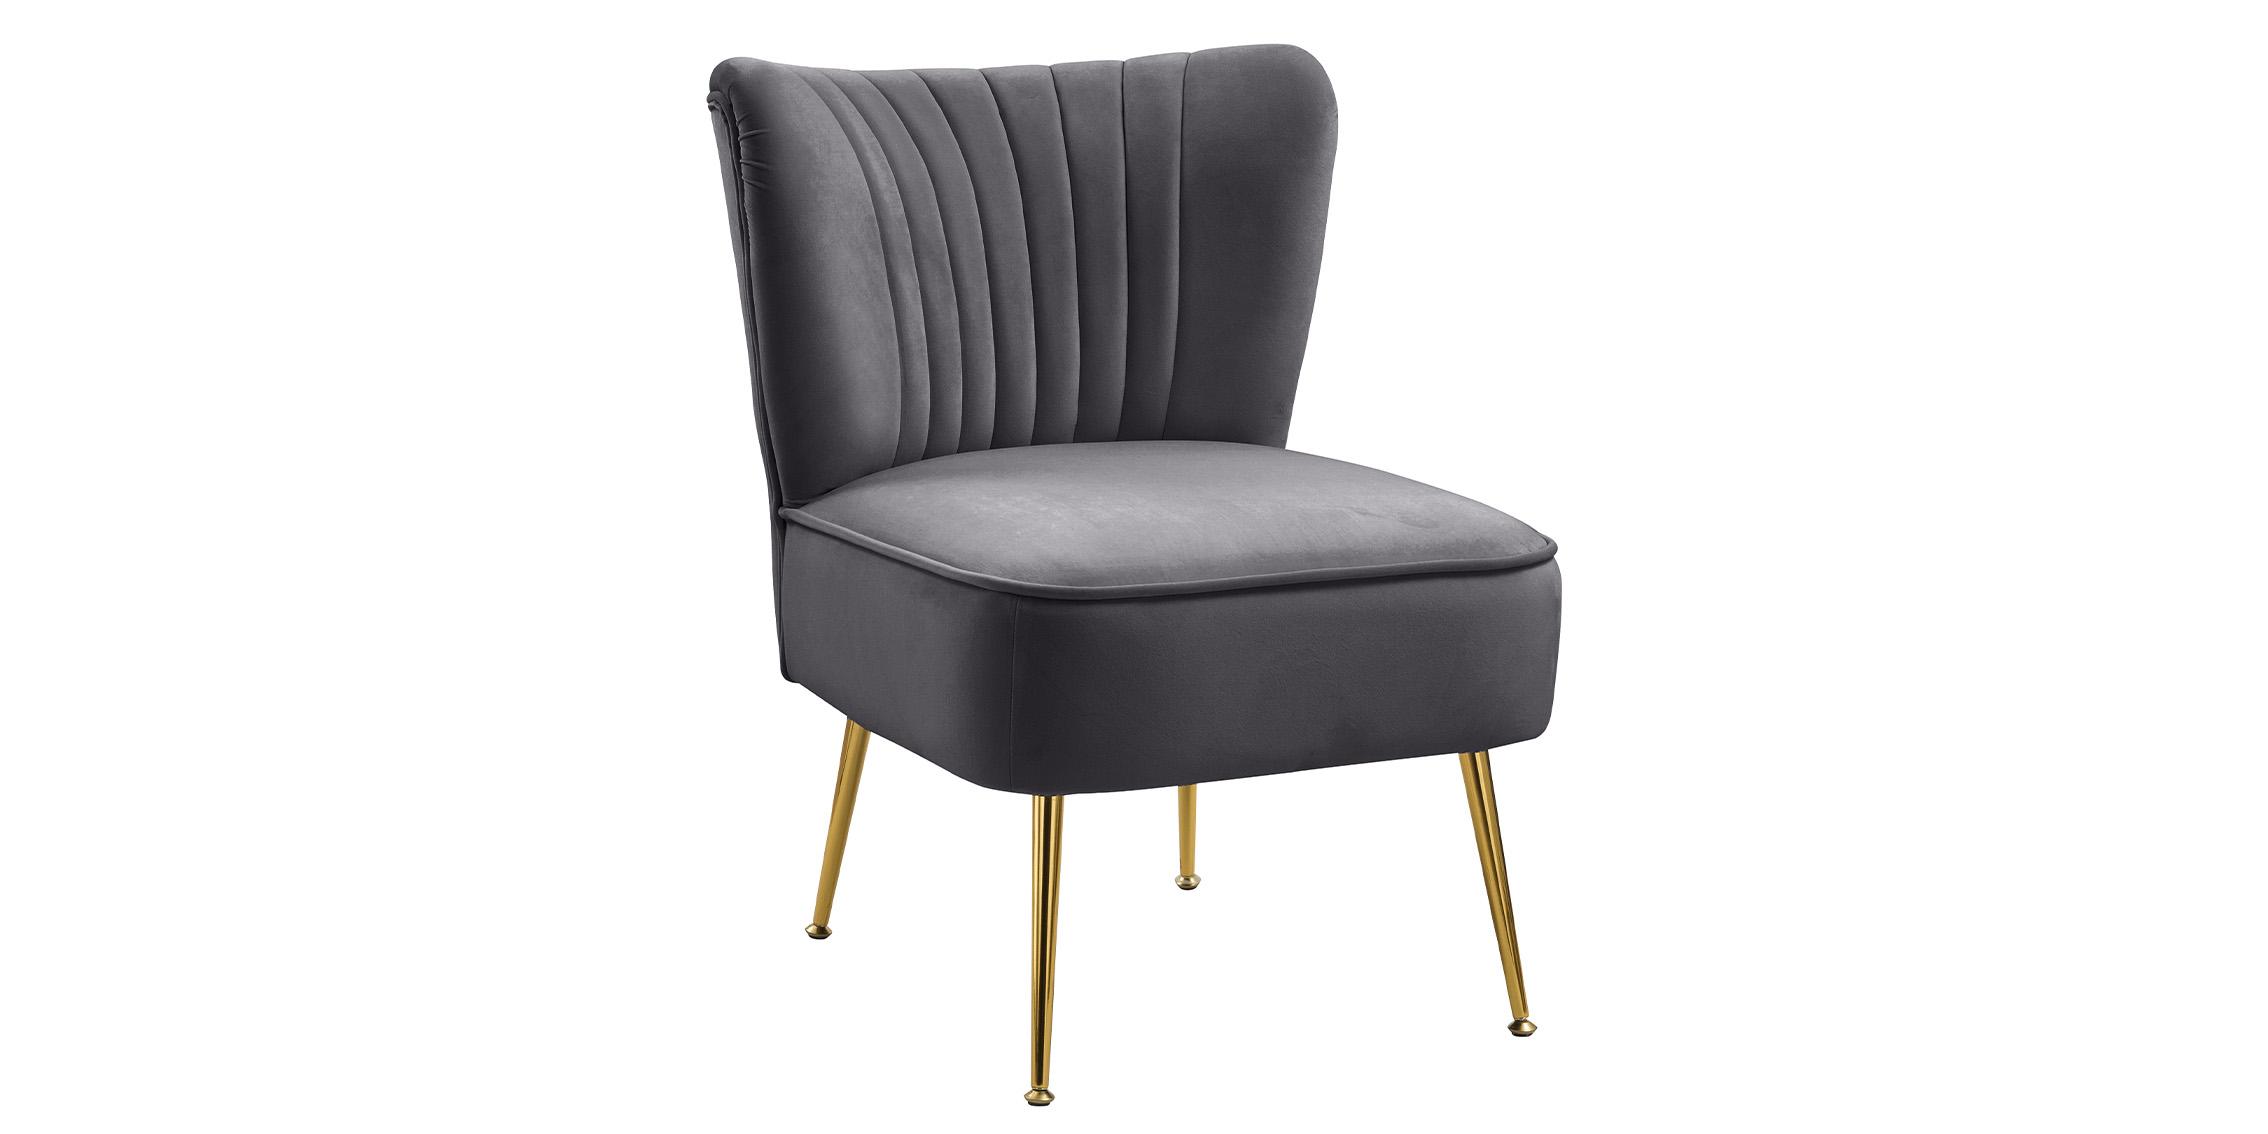 Contemporary, Modern Accent Chair TESS 504Grey 504Grey in Gray Velvet